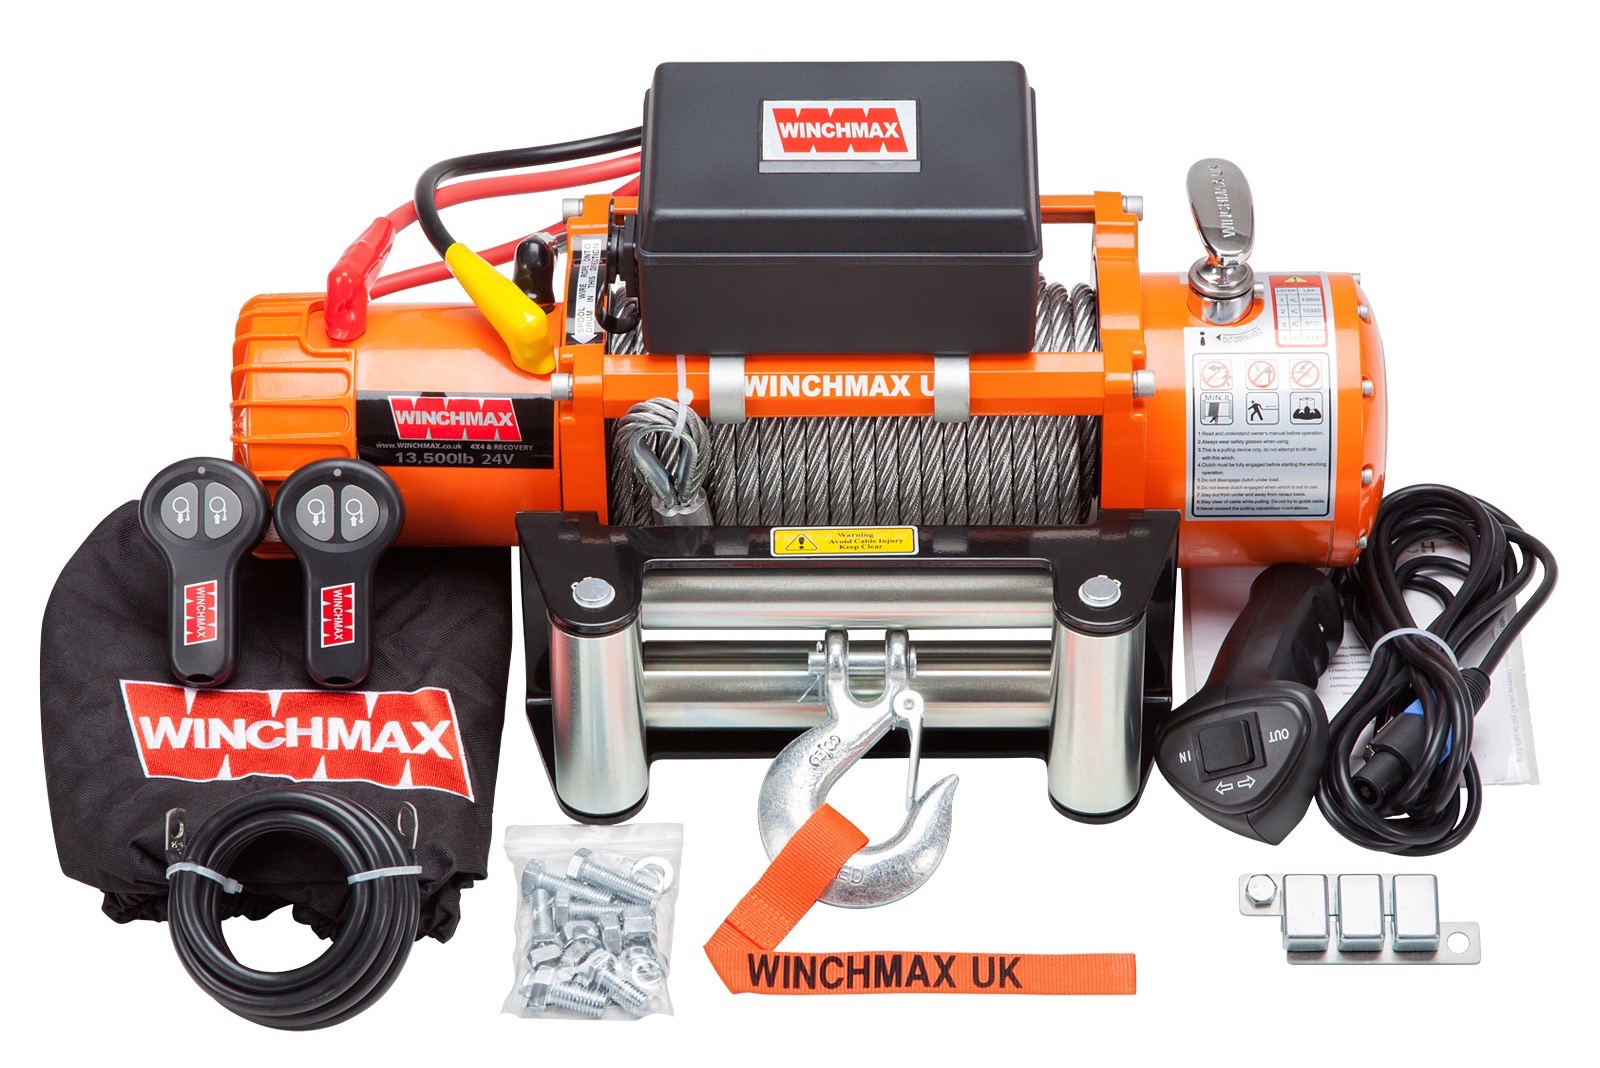 product_view.php?pid=WINCHMAX 24V 13500LB STEEL CABLE RECOVERY WINCH 